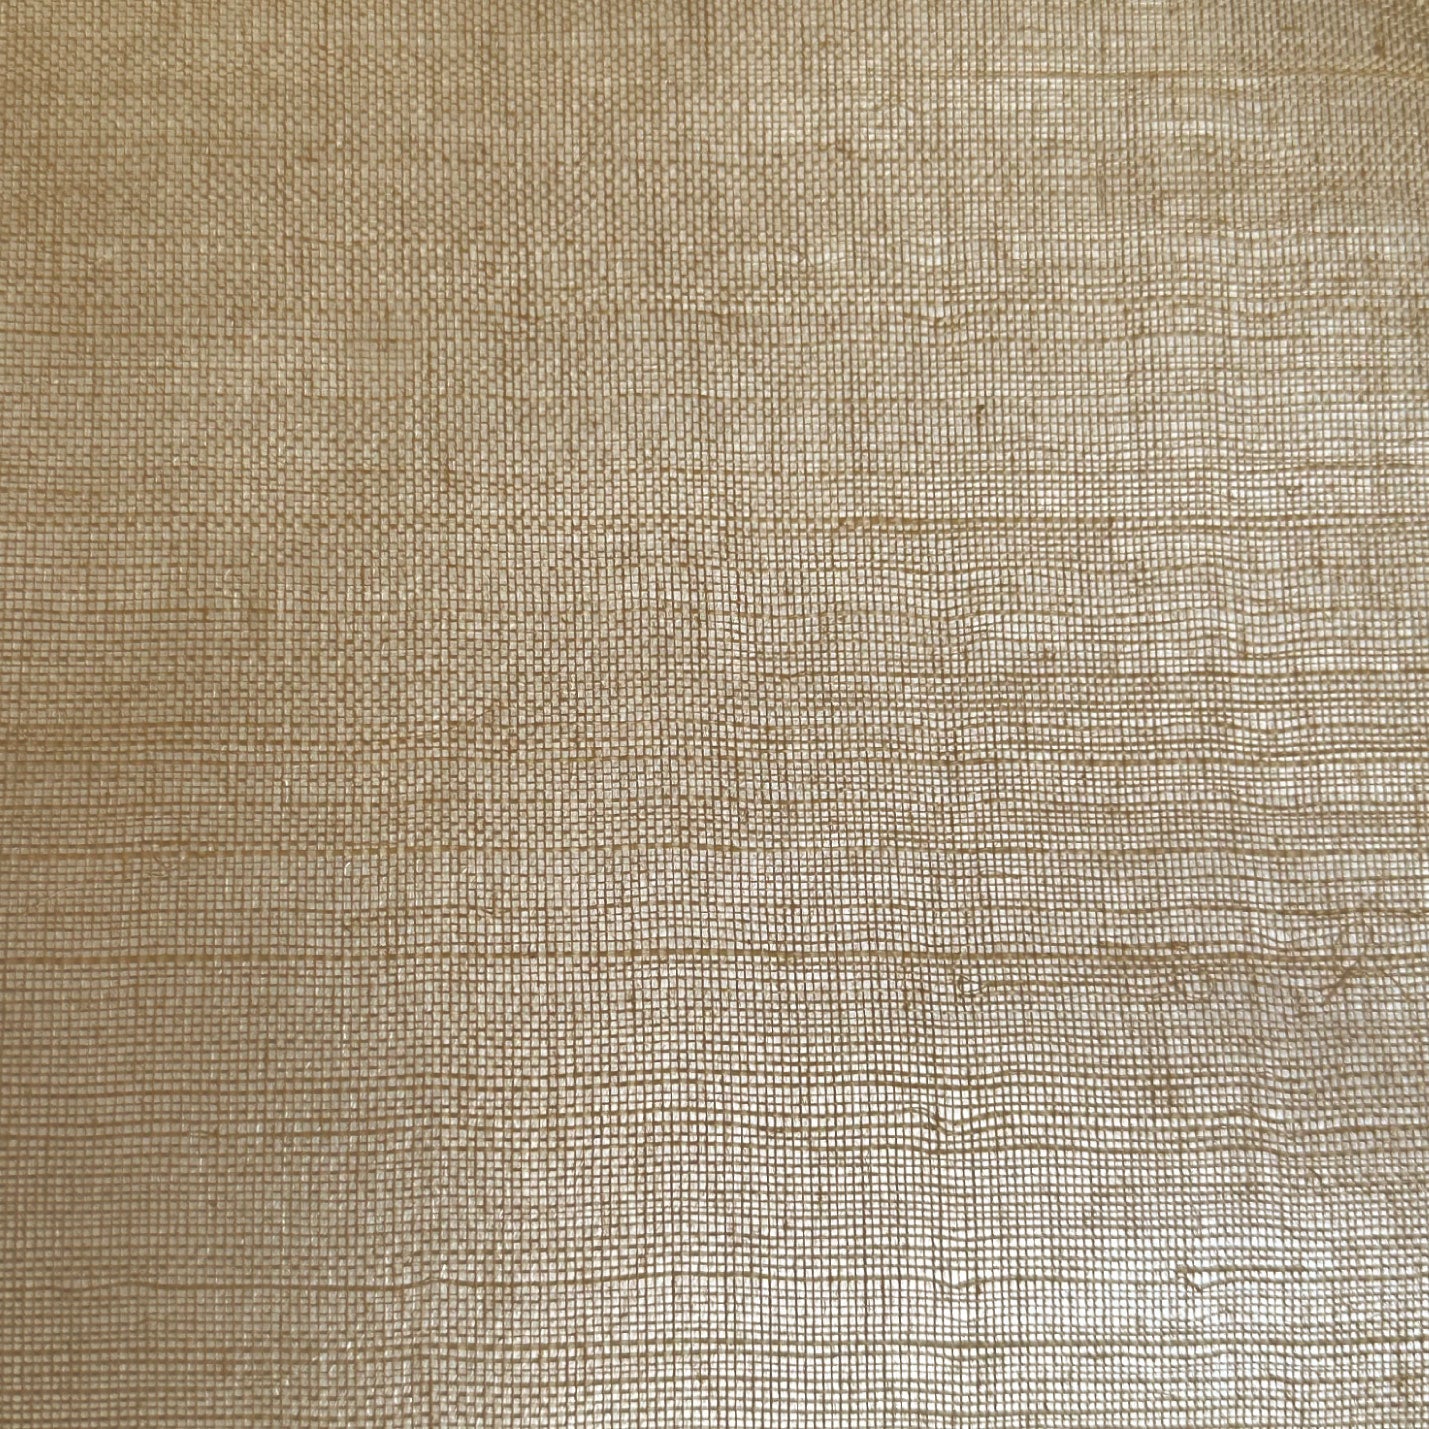 non-toxic sisal metallic textured wallpaper, eco friendly and sustainable fused to silver metallic paper on this designer wallcovering that is a tan colored neutral high-end paper.